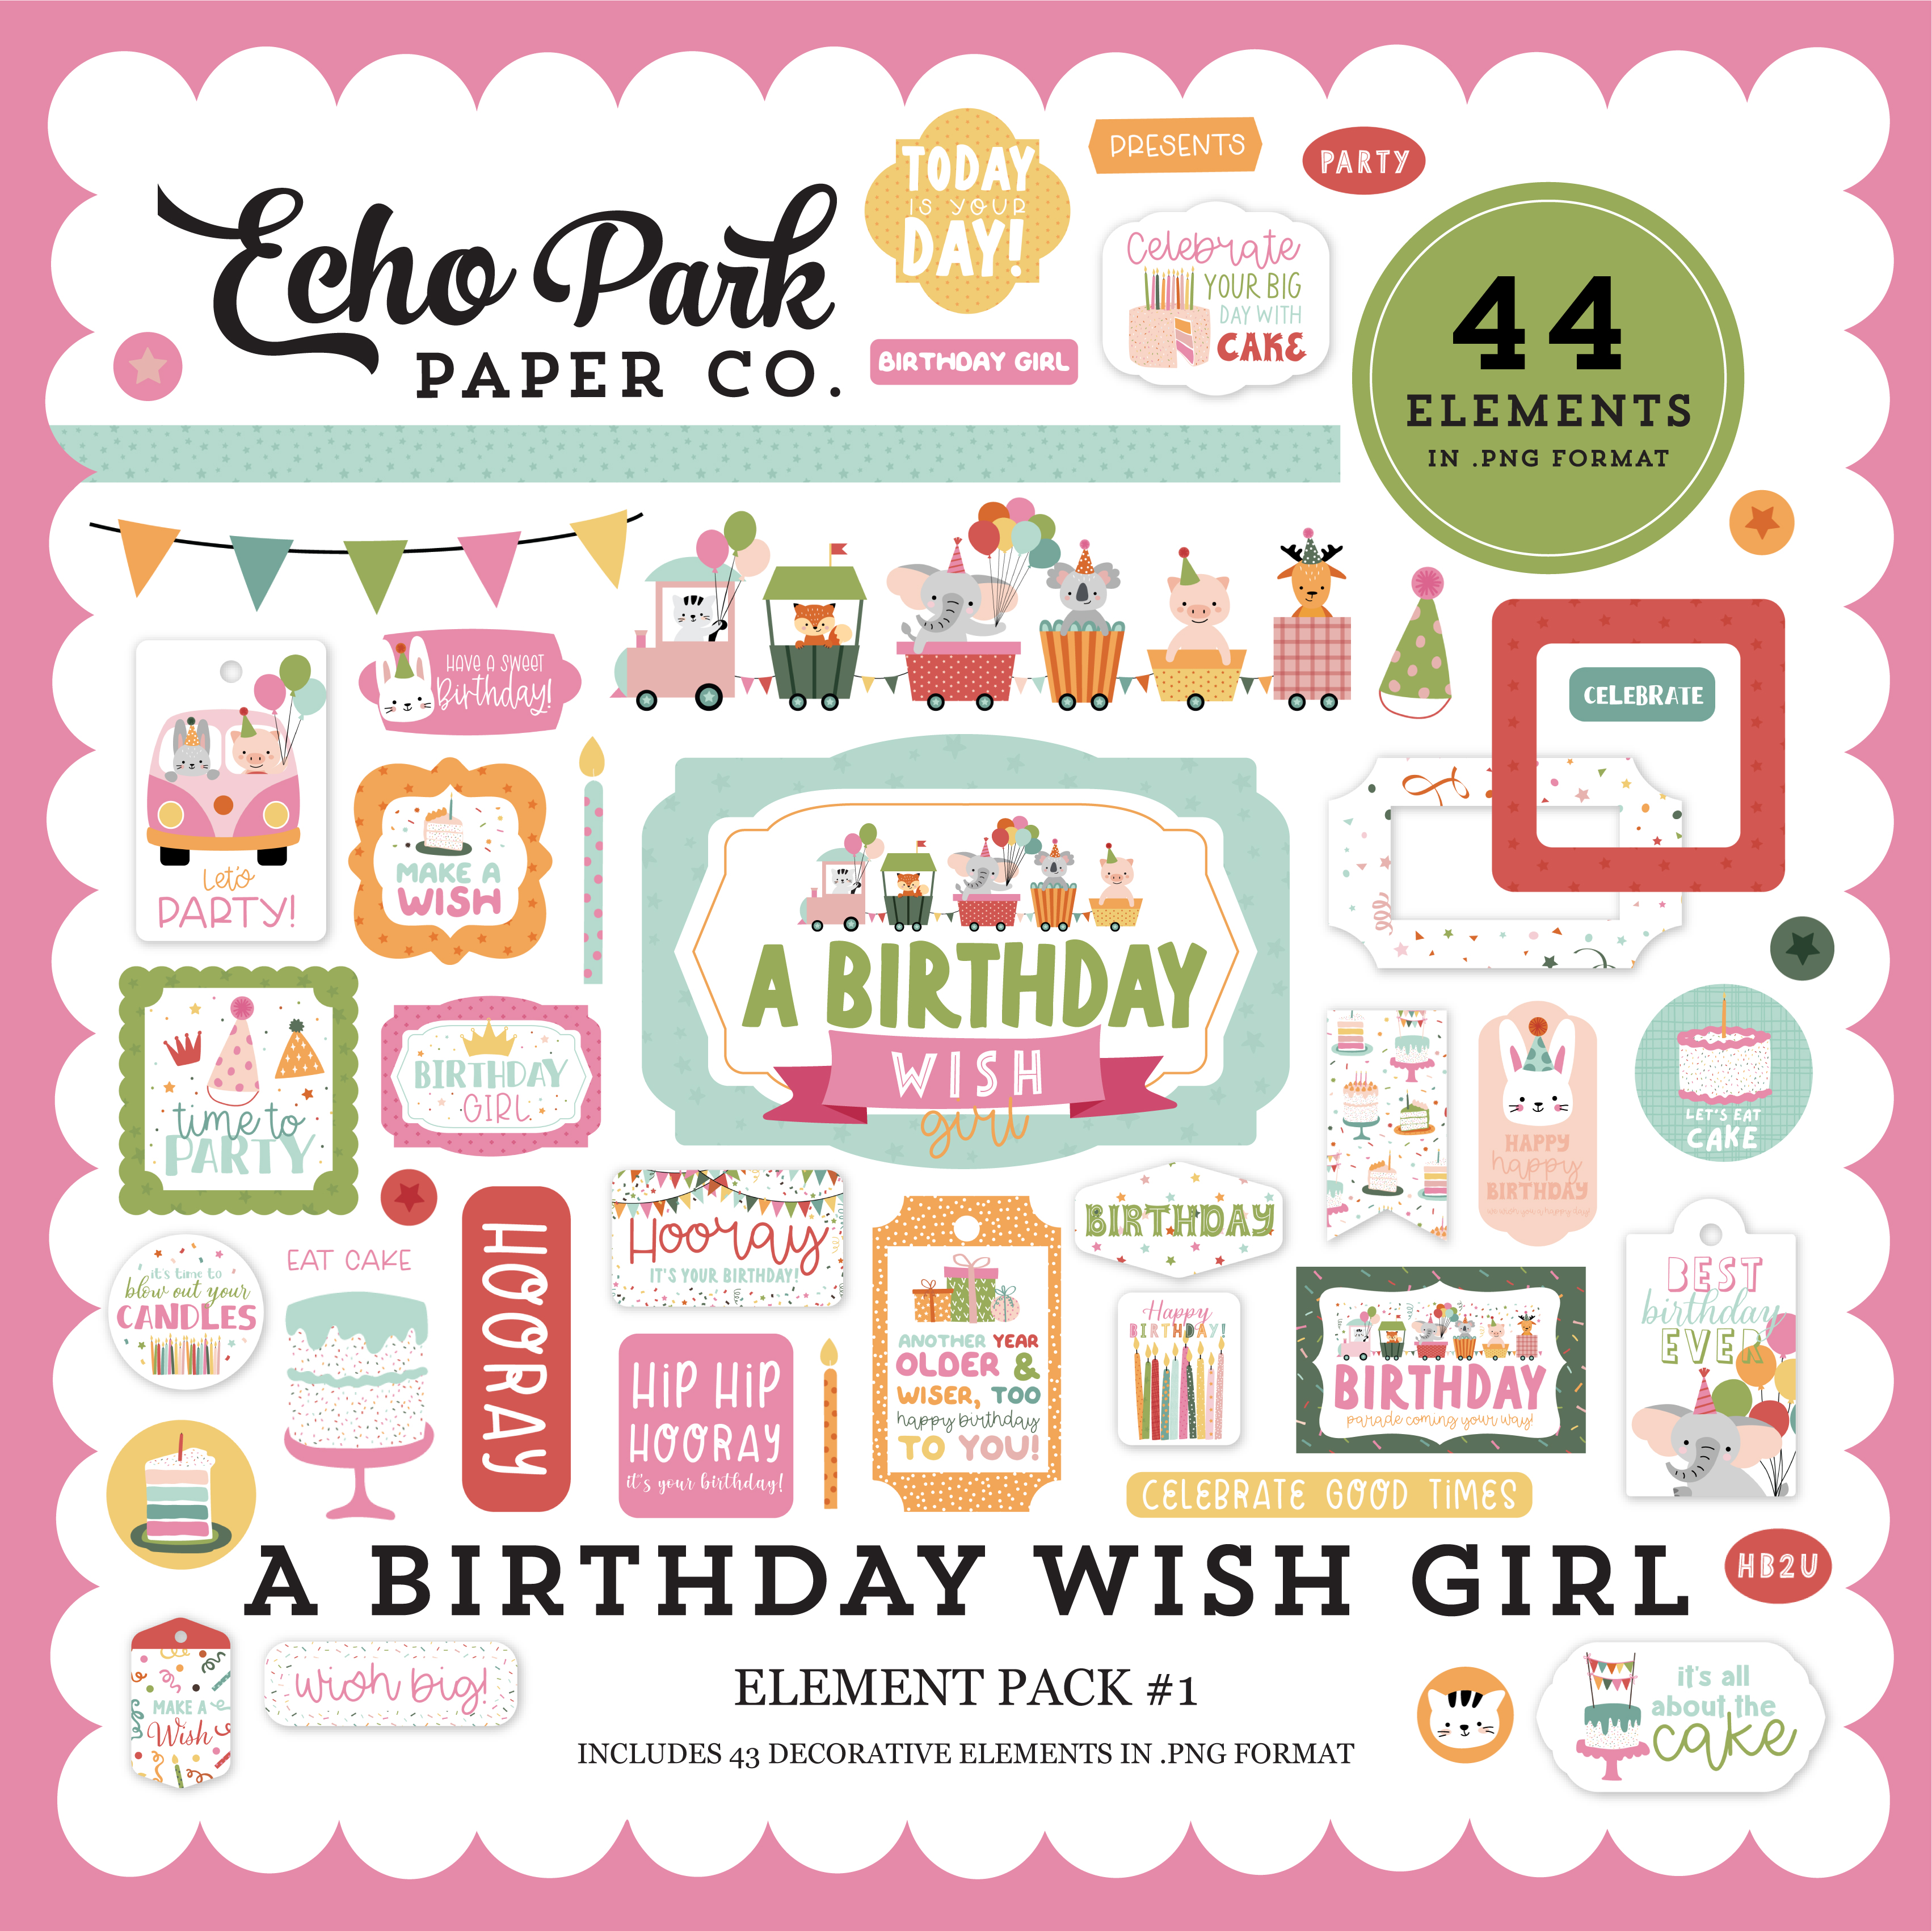 A Birthday Wish Girl Element Pack #1